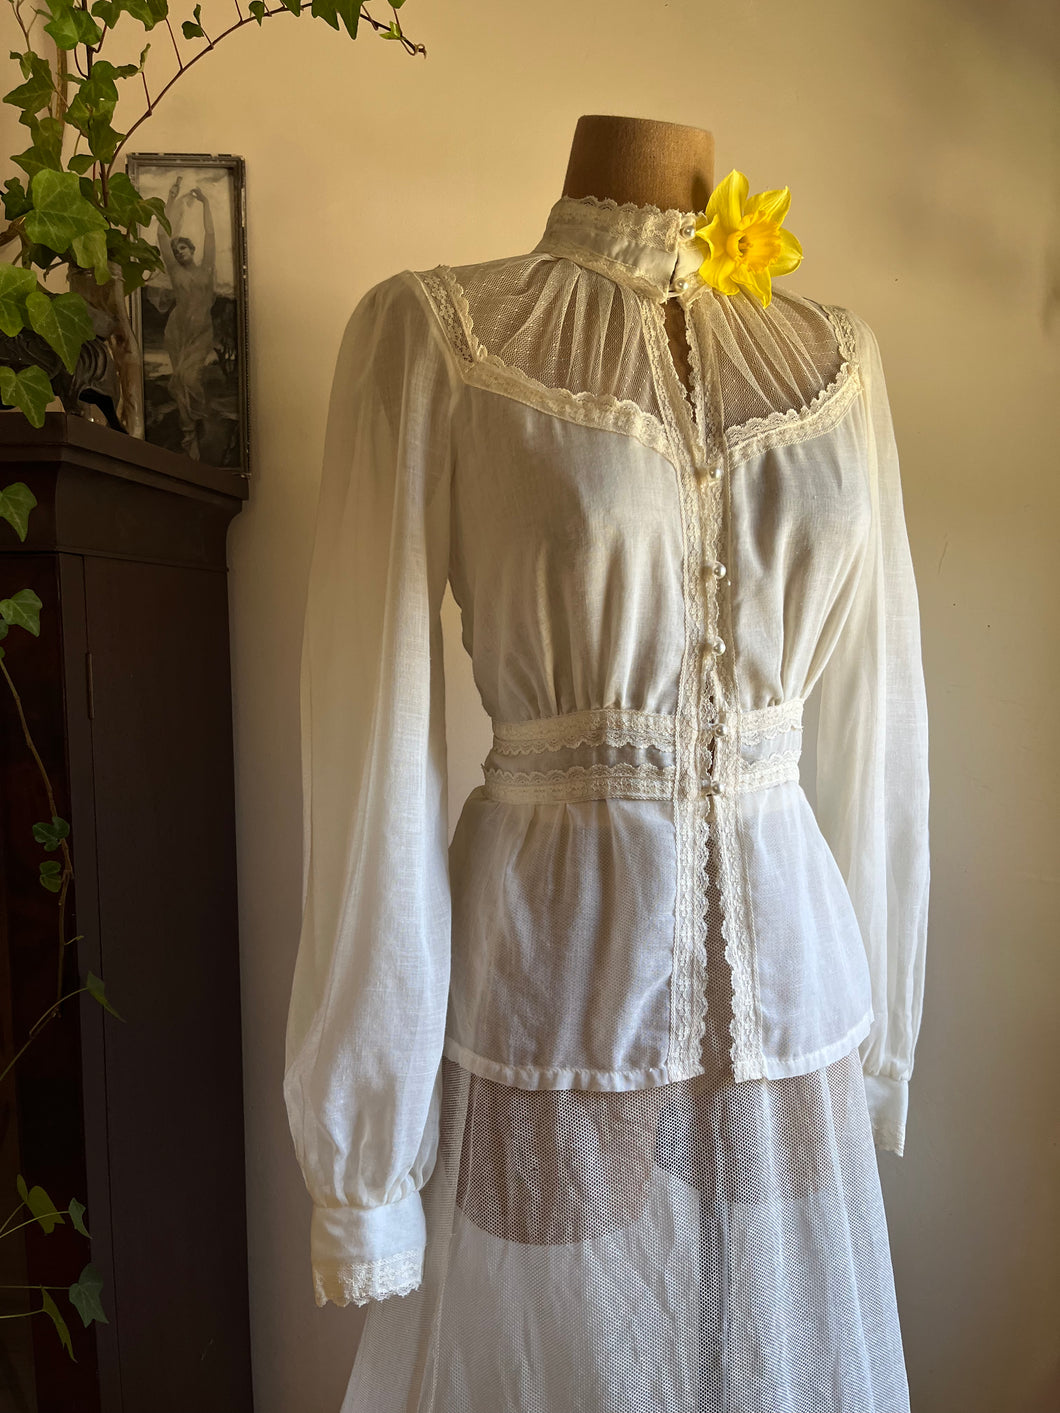 Authentic 1970's vintage ivory voile and net lace Gunne Sax blouse